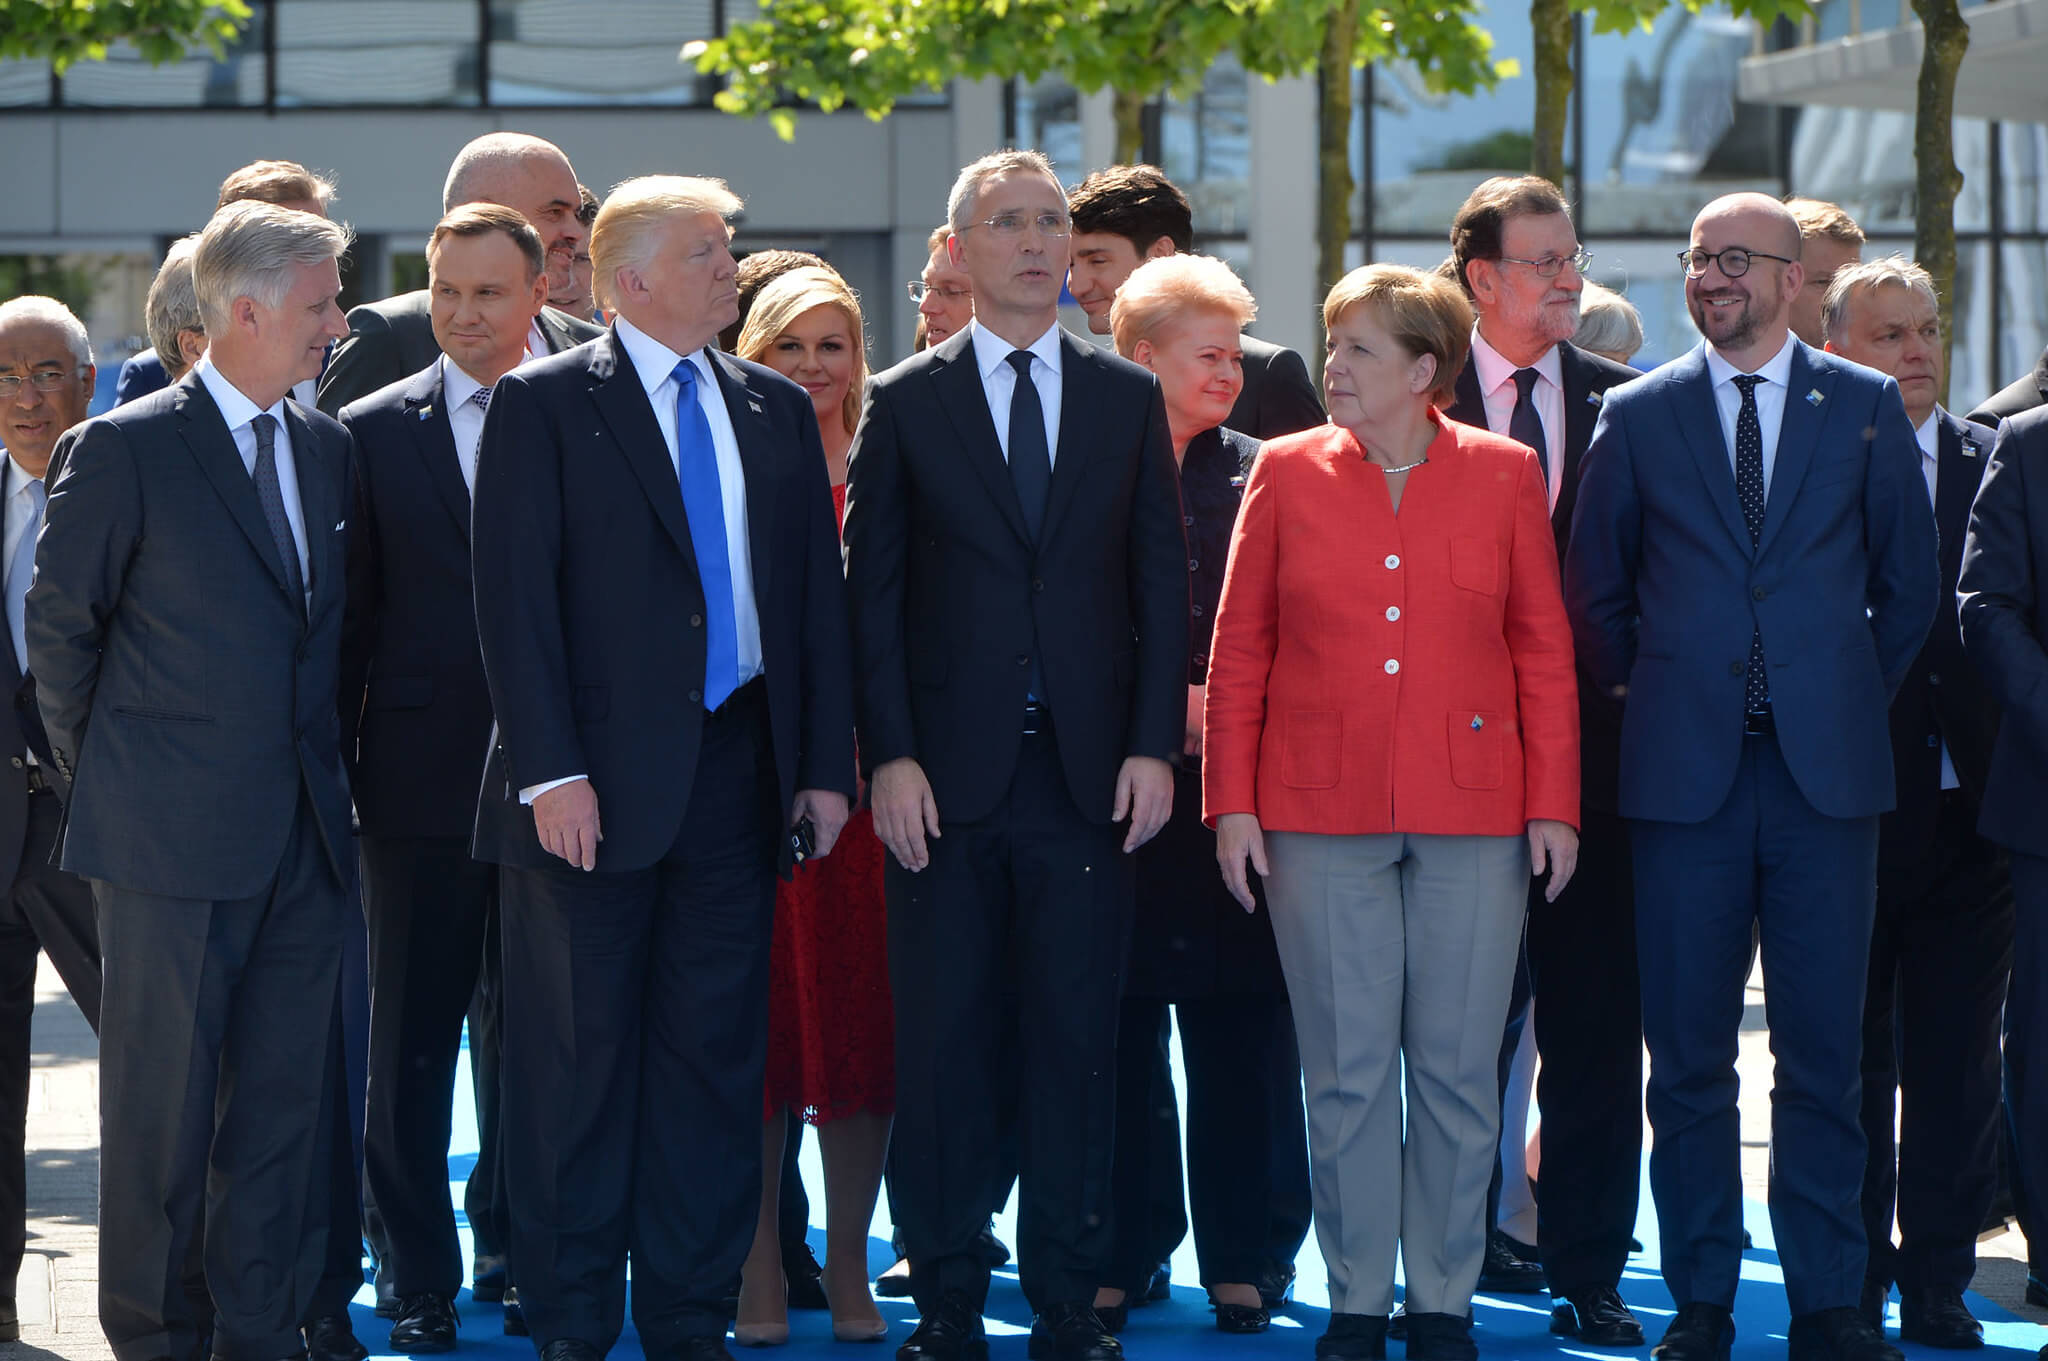 Rohac - HM King Philippe (King of the Belgians), Donald Trump (President, United States), NATO Secretary General Jens Stoltenberg, Angela Merkel (Federal Chancellor, Germany) and Charles Michel (Prime Minister, Belgium) during a NSATO summit in 2017. NATO 